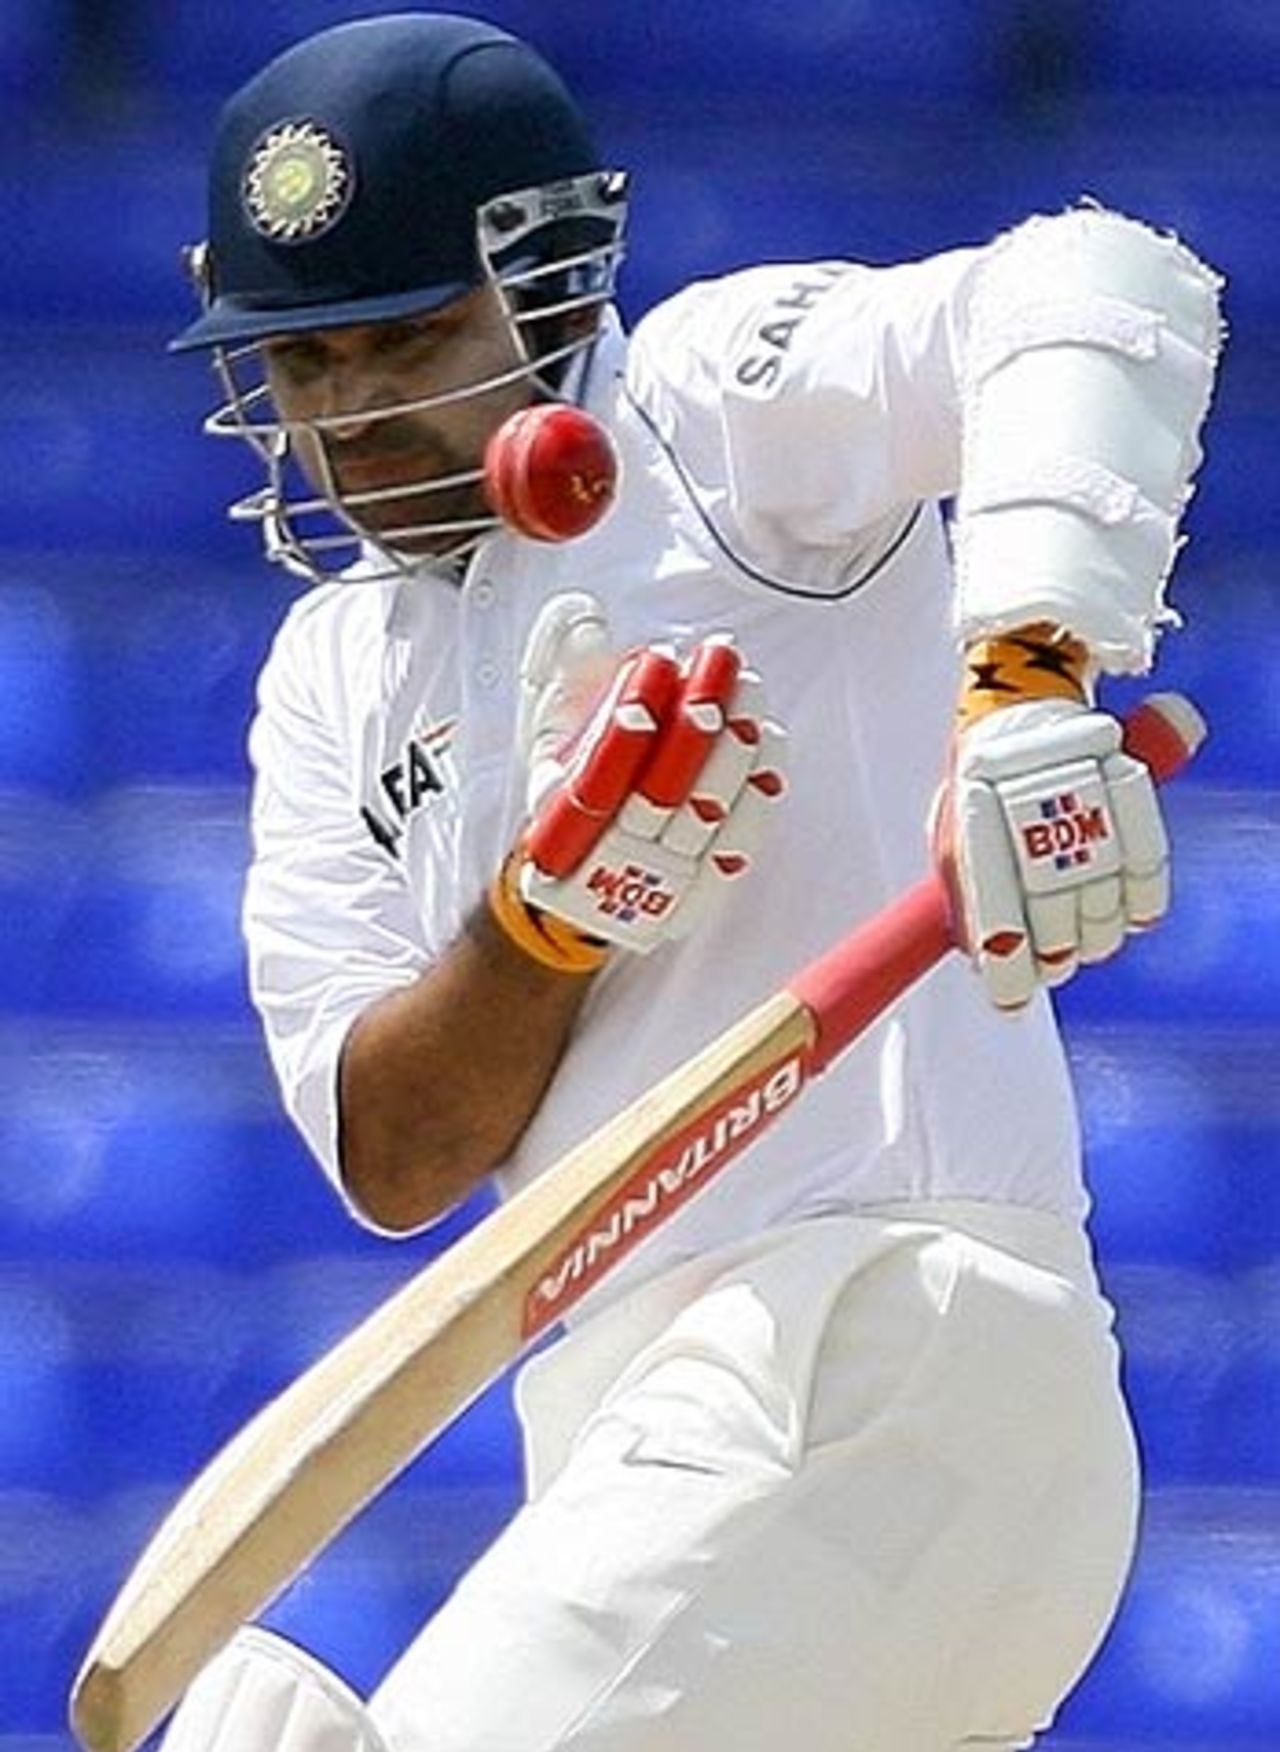 Virender Sehwag fends off a short delivery, West Indies v India, 3rd Test, St Kitts, 5th day, June 26, 2006